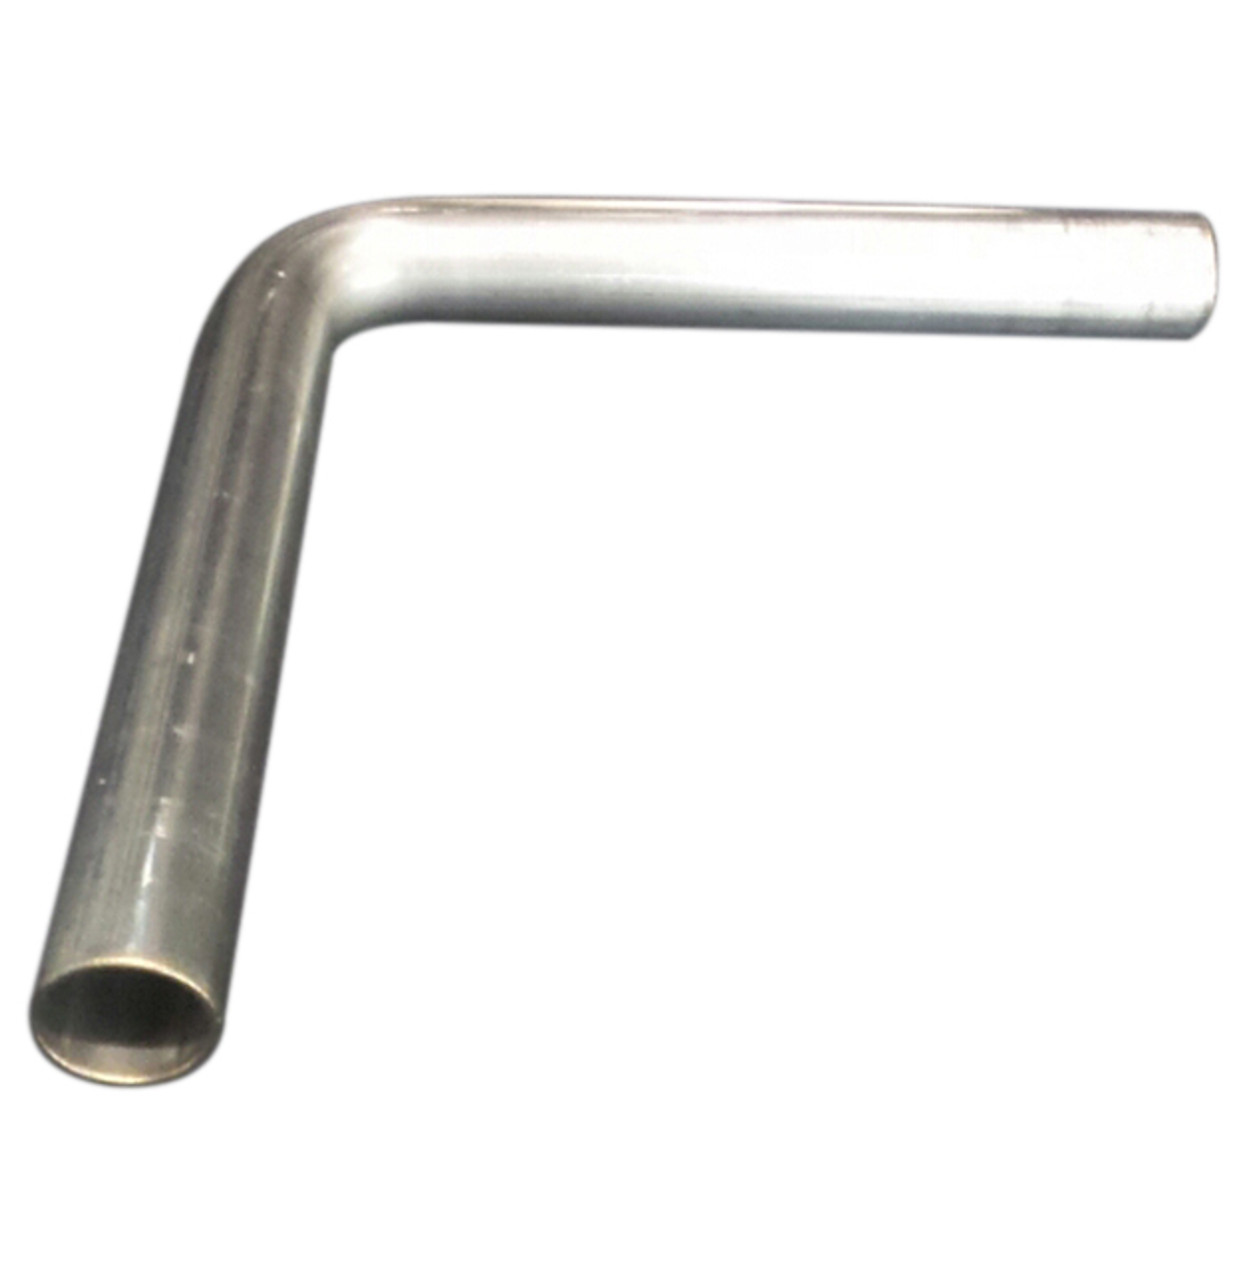 304 Stainless Bent Elbow 1.500  90-Degree